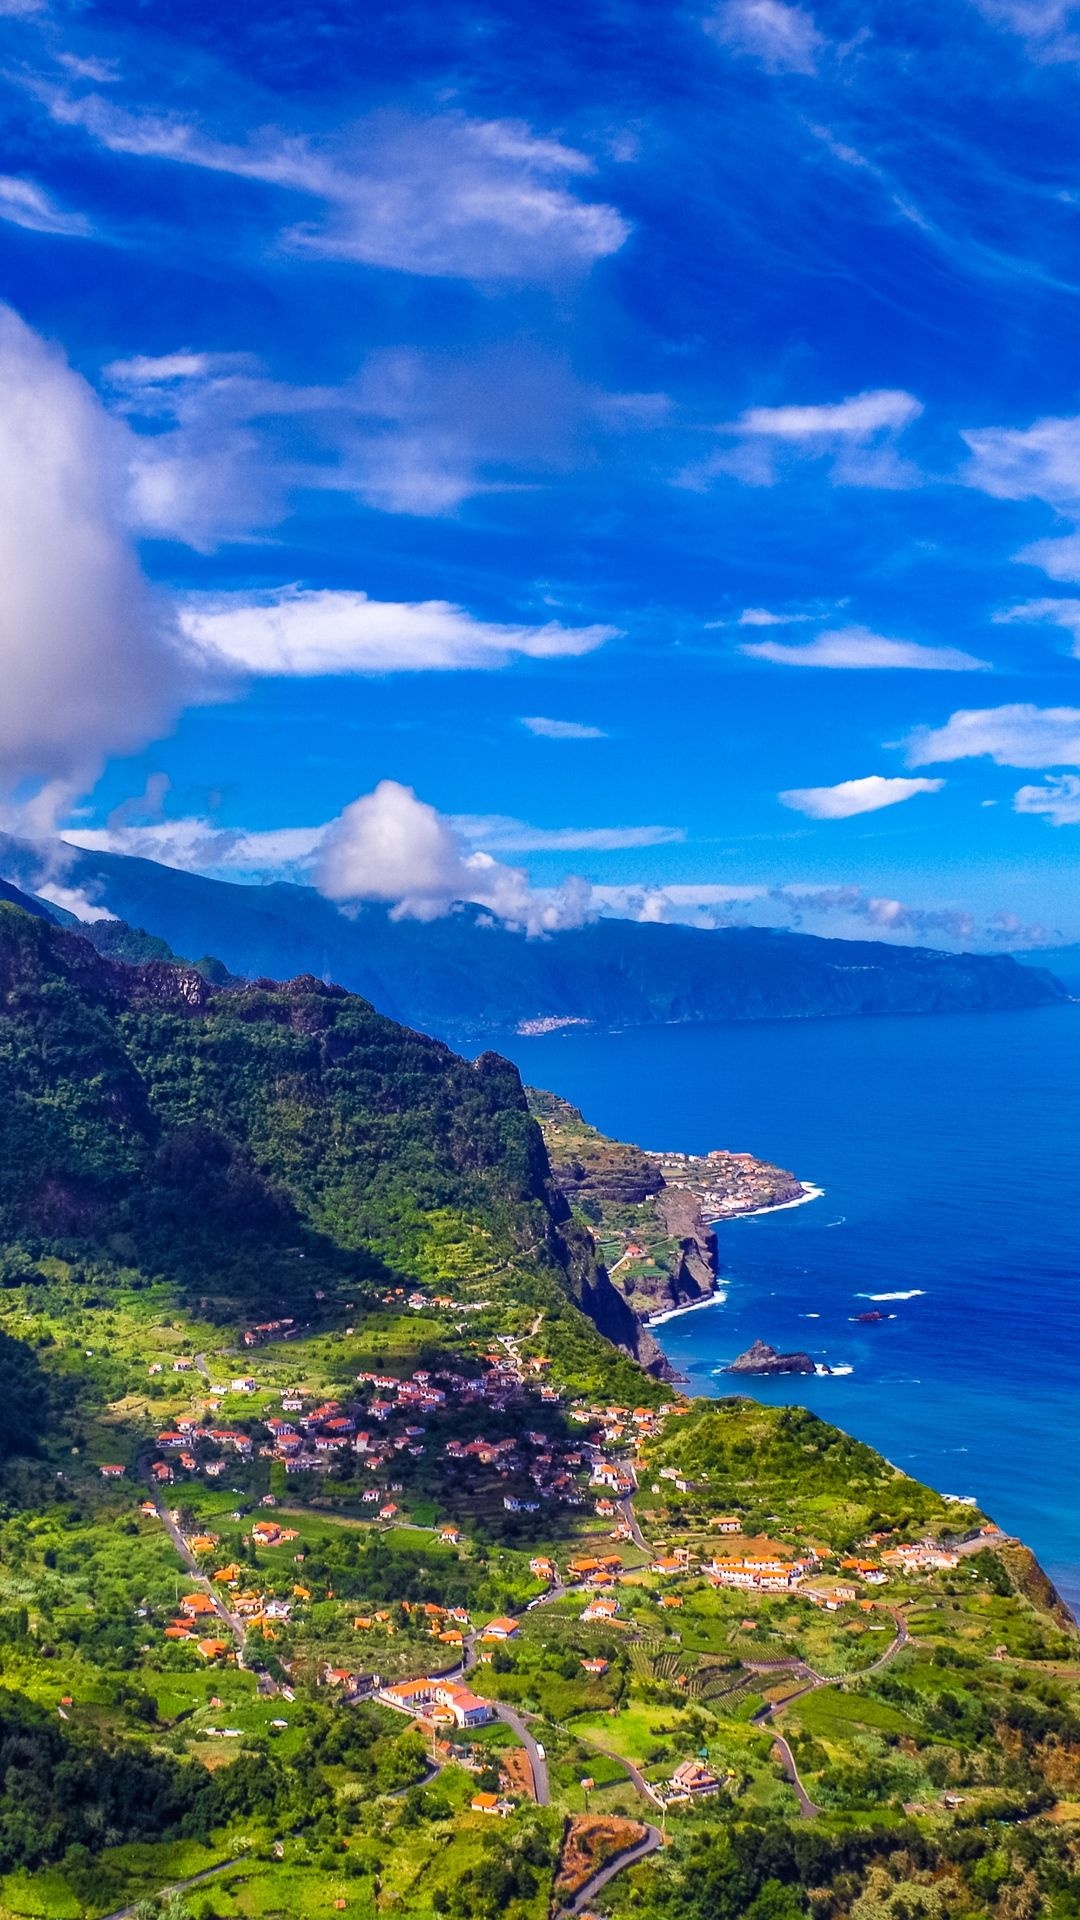 Madeira travels, Nature in HD, Stunning nature wallpapers, Nature's beauty, 1080x1920 Full HD Handy